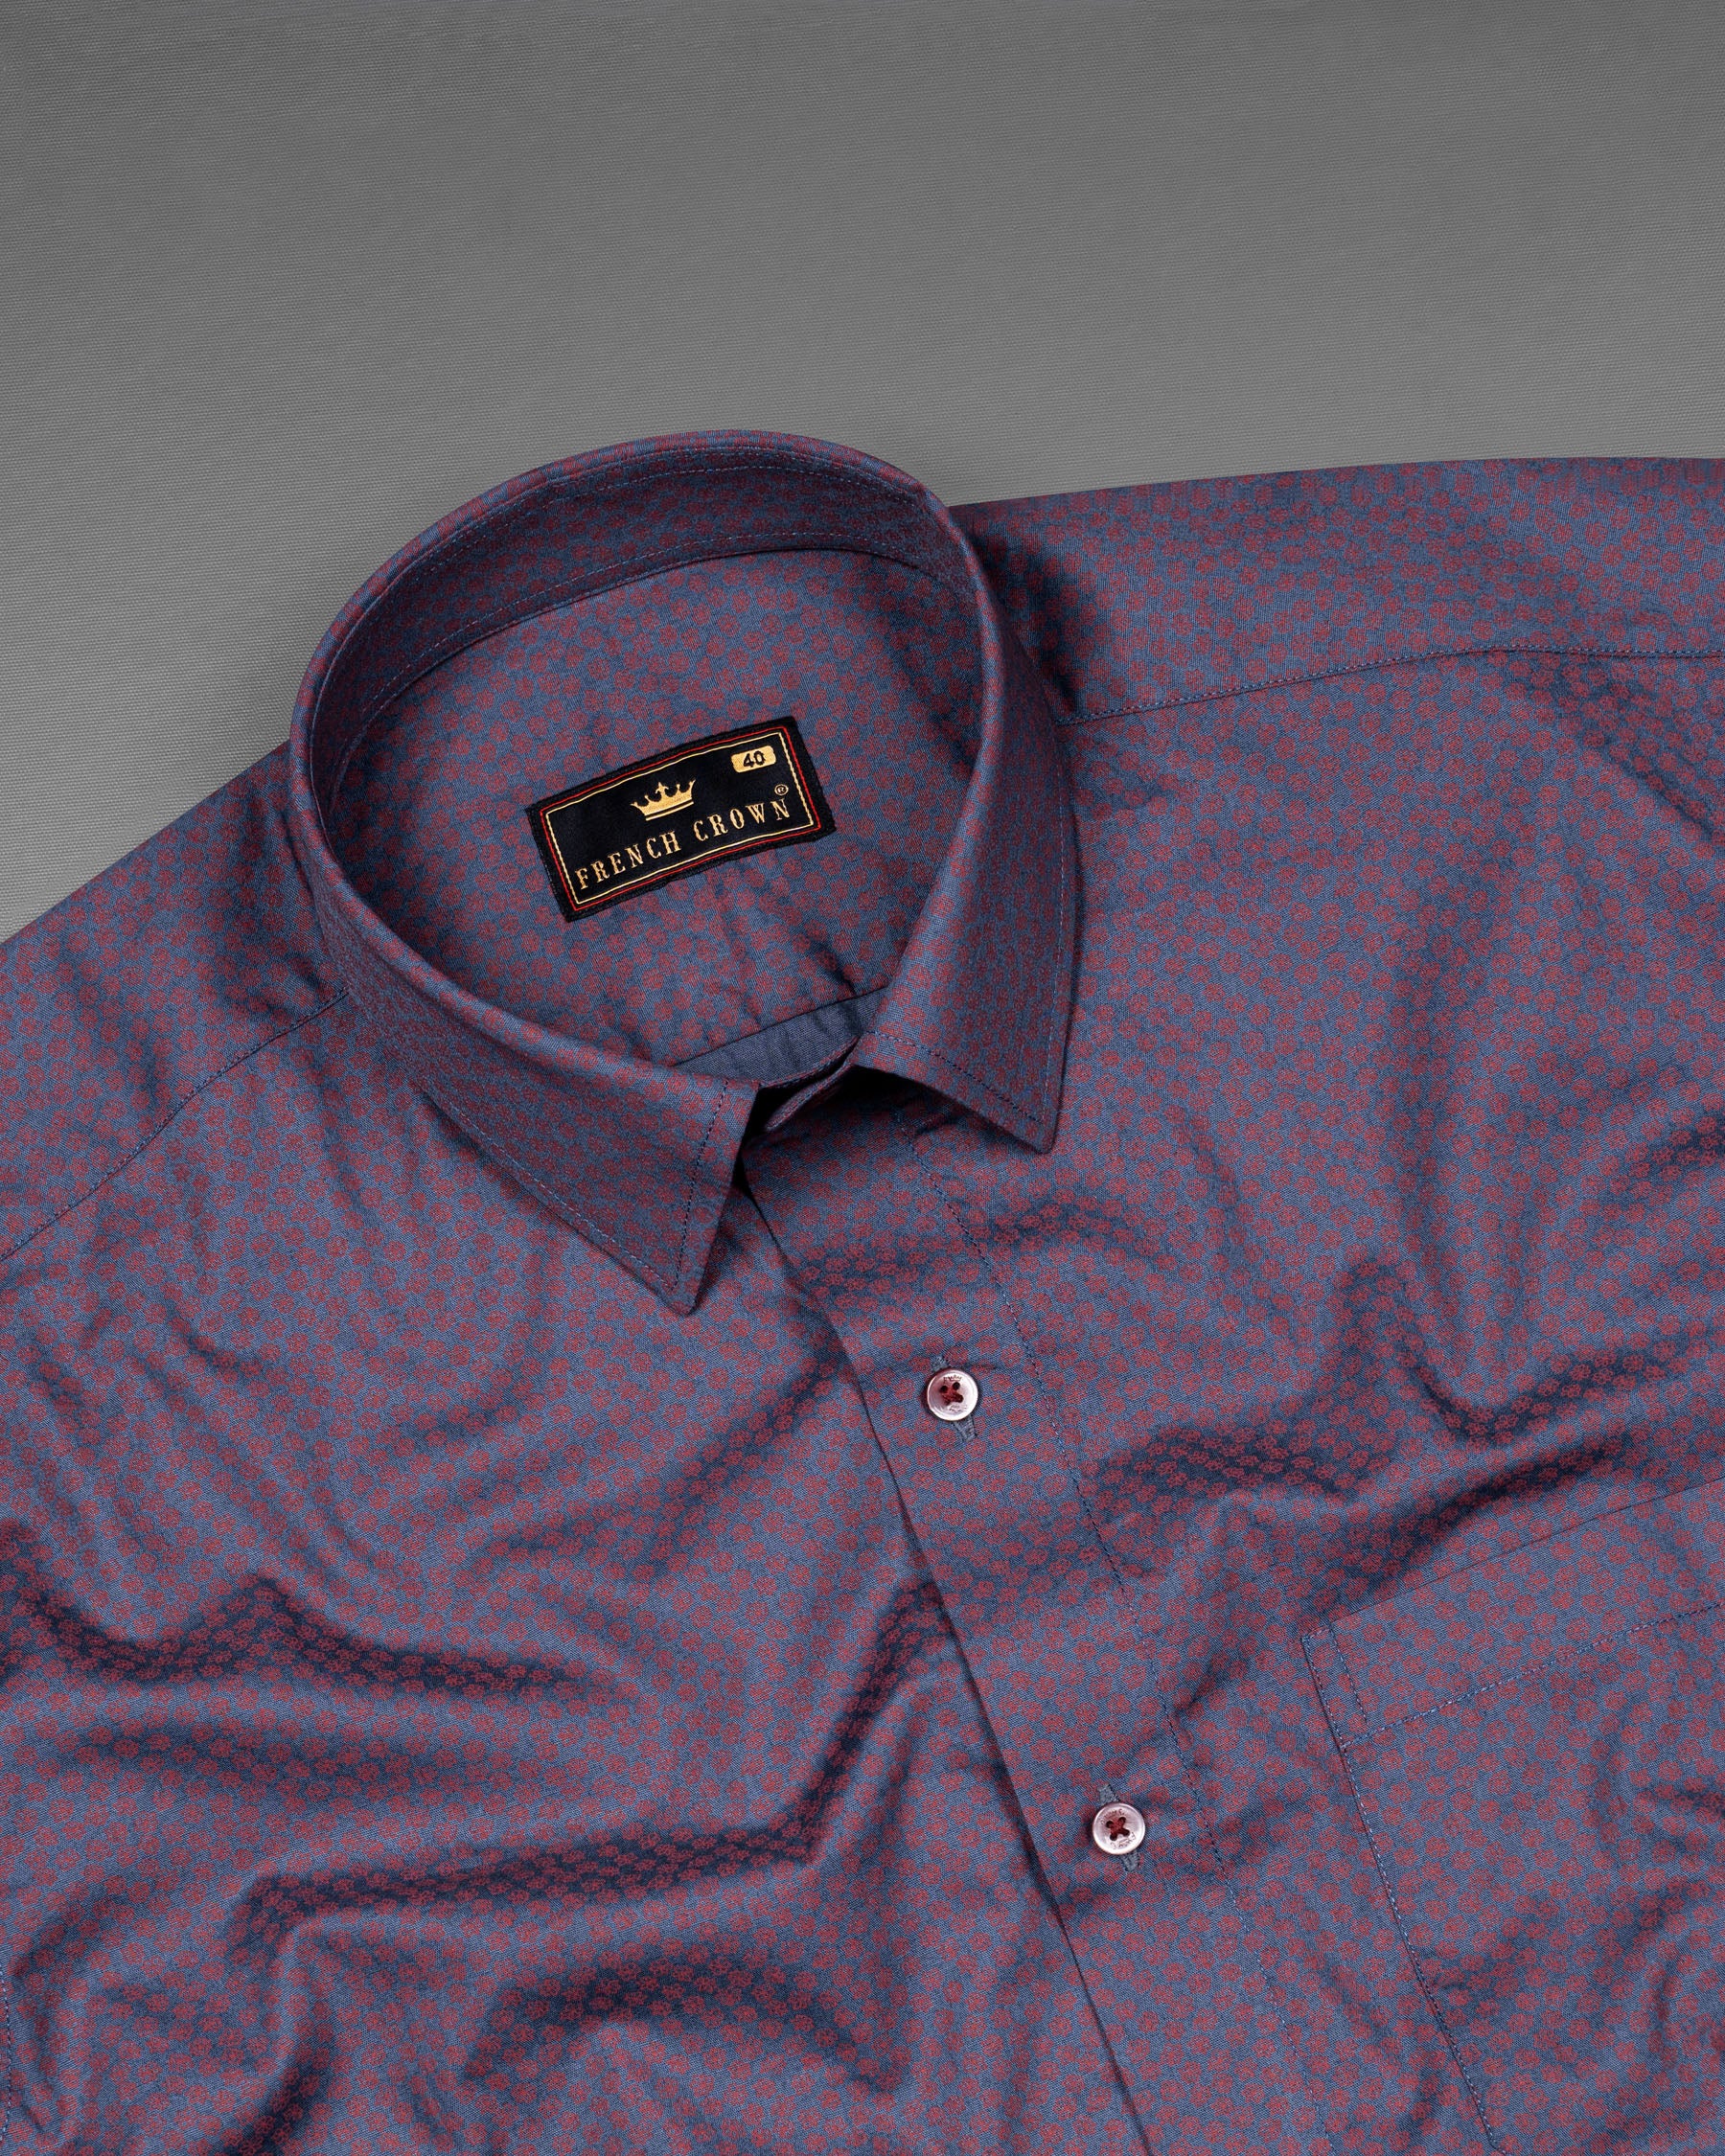 Cadet with Cadillac Two Tone Premium Cotton Shirt